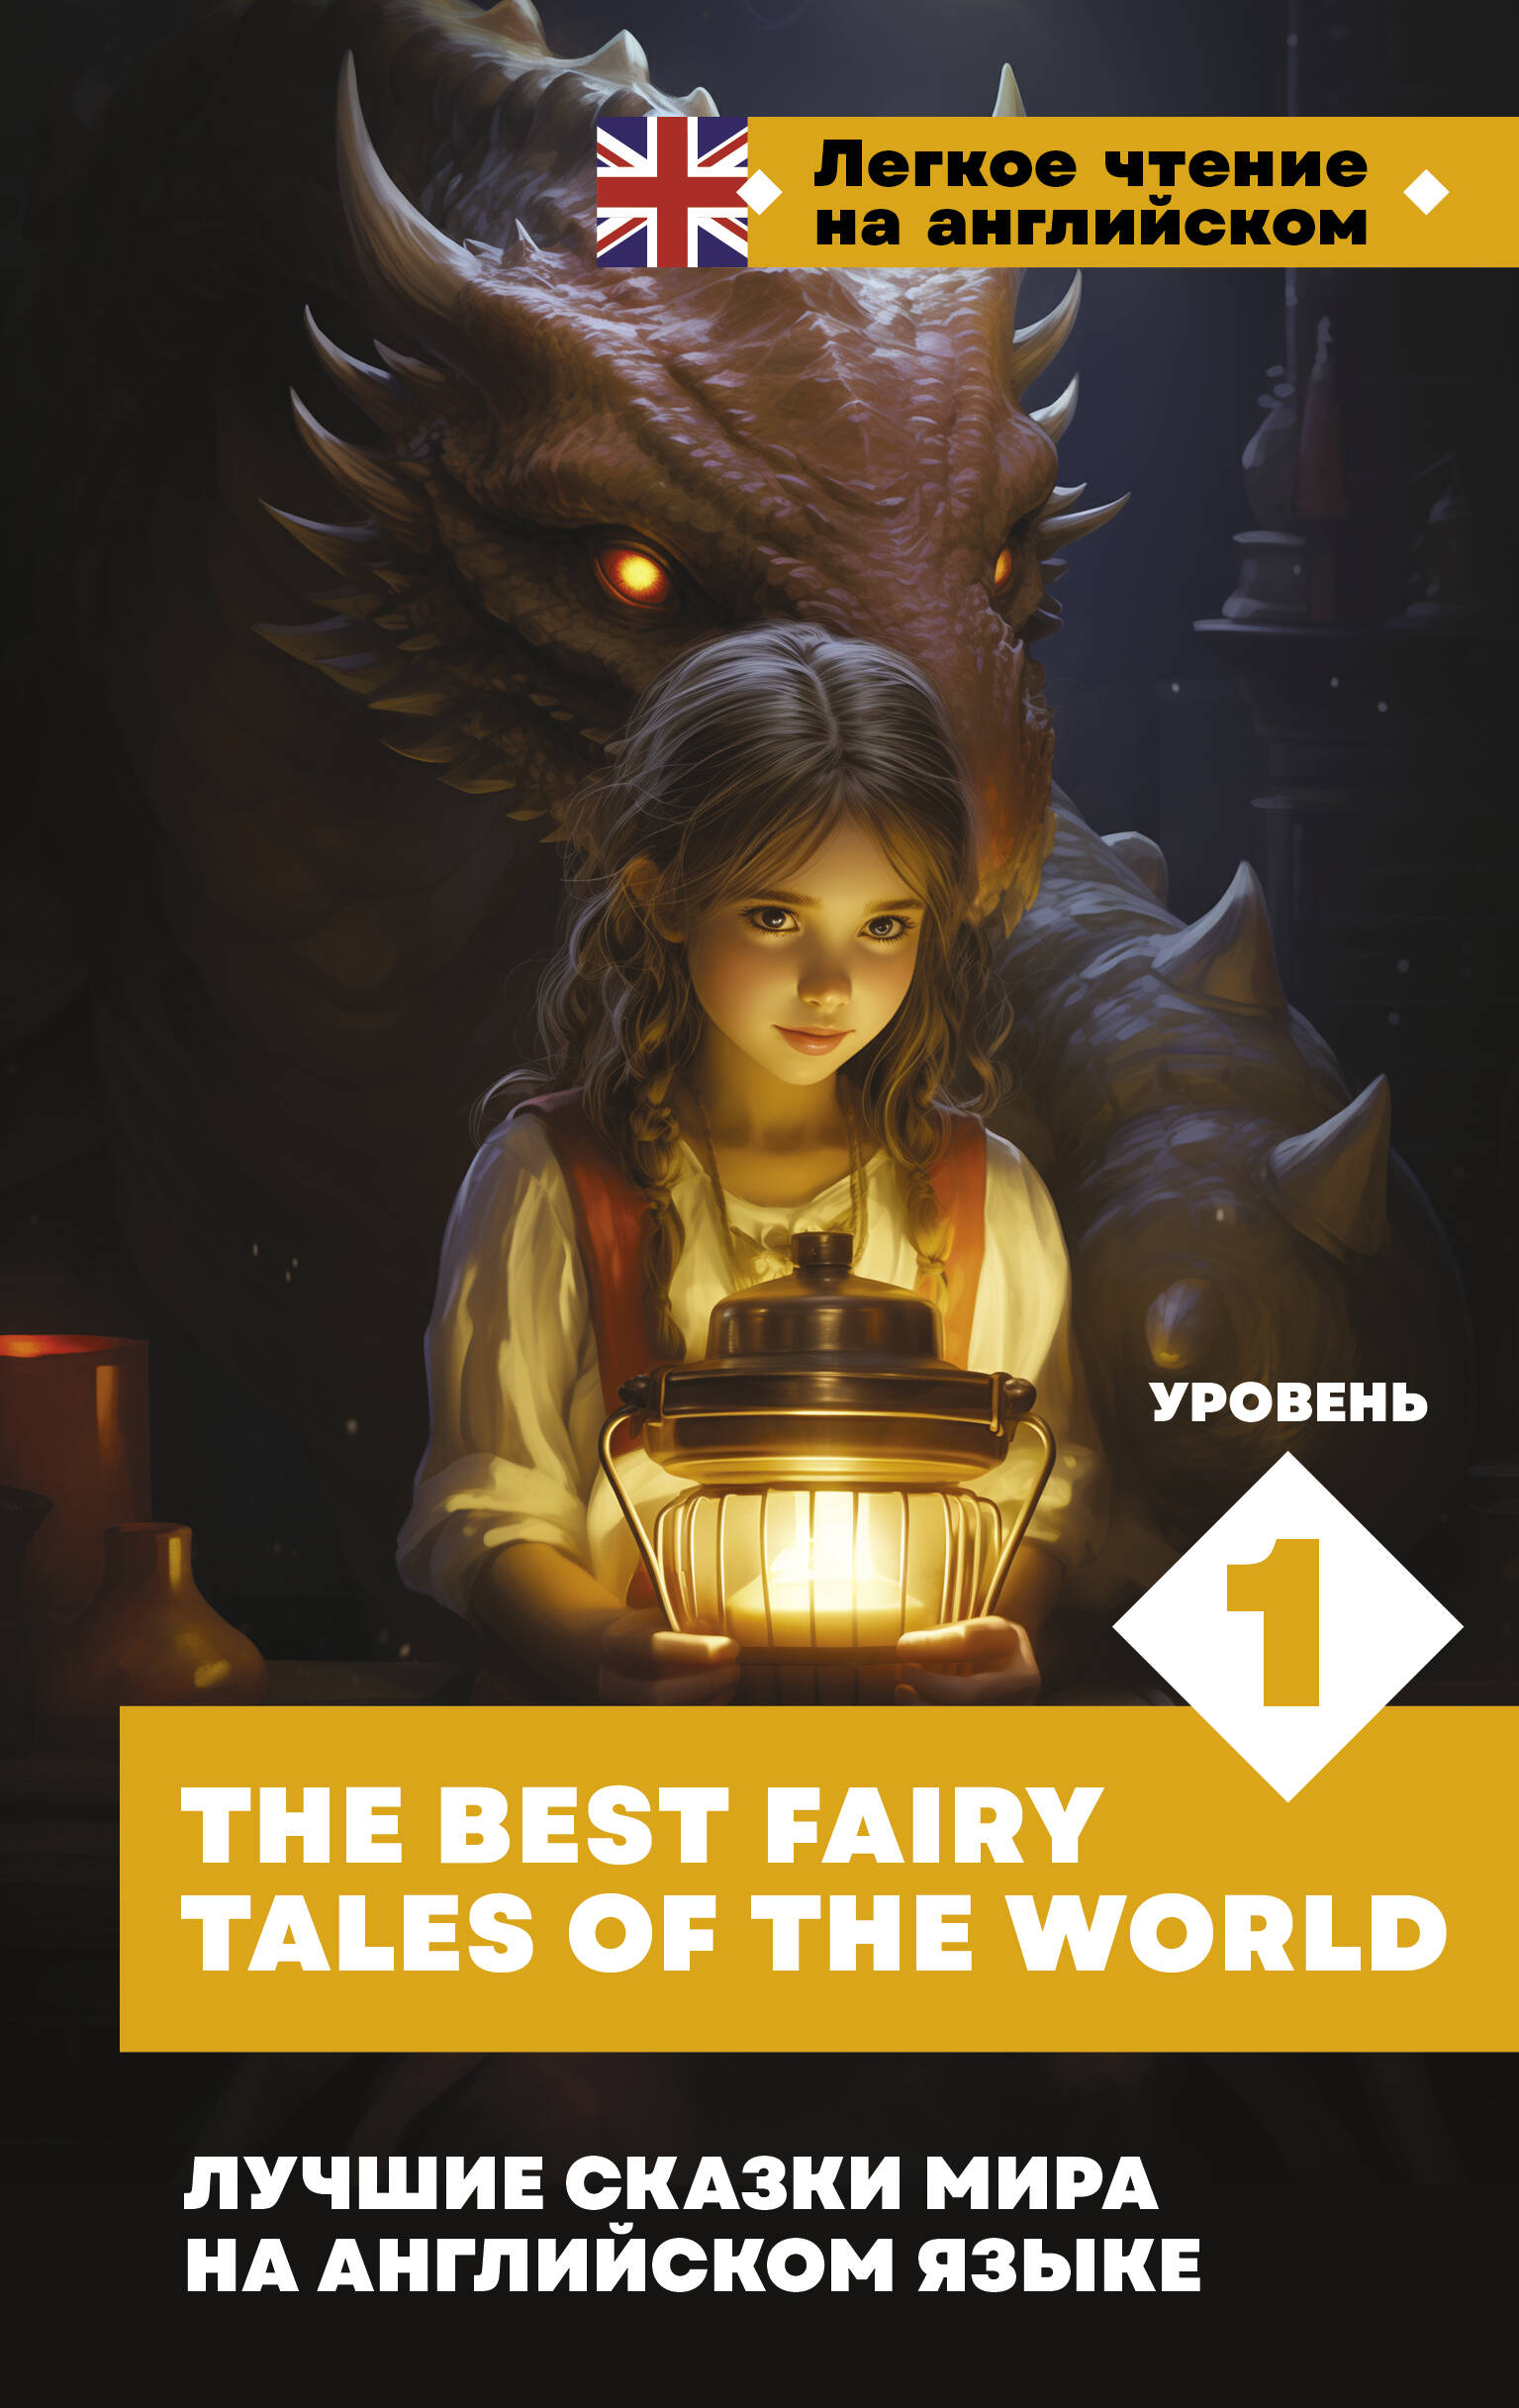      .  1 = The Best Fairy Tales of the World